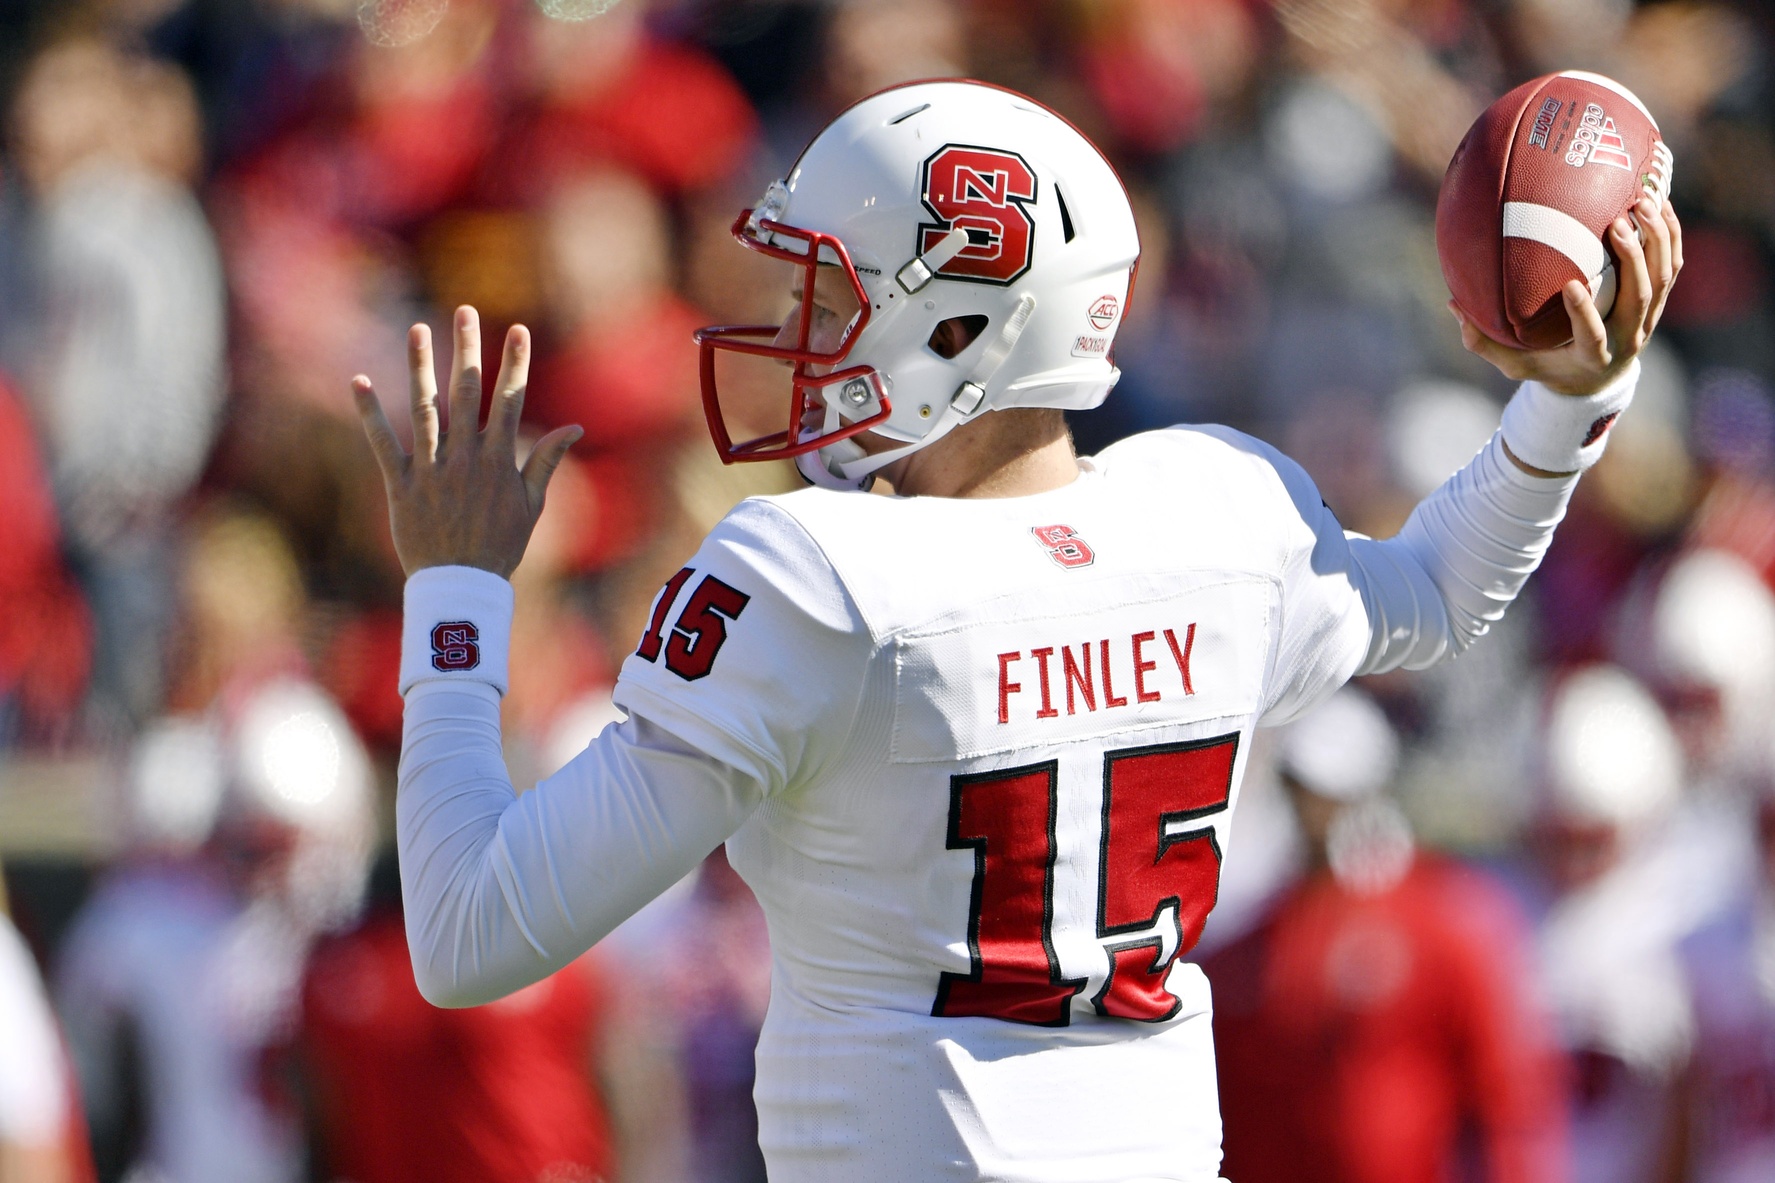 Oct 22, 2016; Louisville, KY, USA; North Carolina State Wolfpack quarterback Ryan Finley (15) looks to pass against the Louisville Cardinals during the second quarter at Papa John's Cardinal Stadium. Mandatory Credit: Jamie Rhodes-USA TODAY Sports